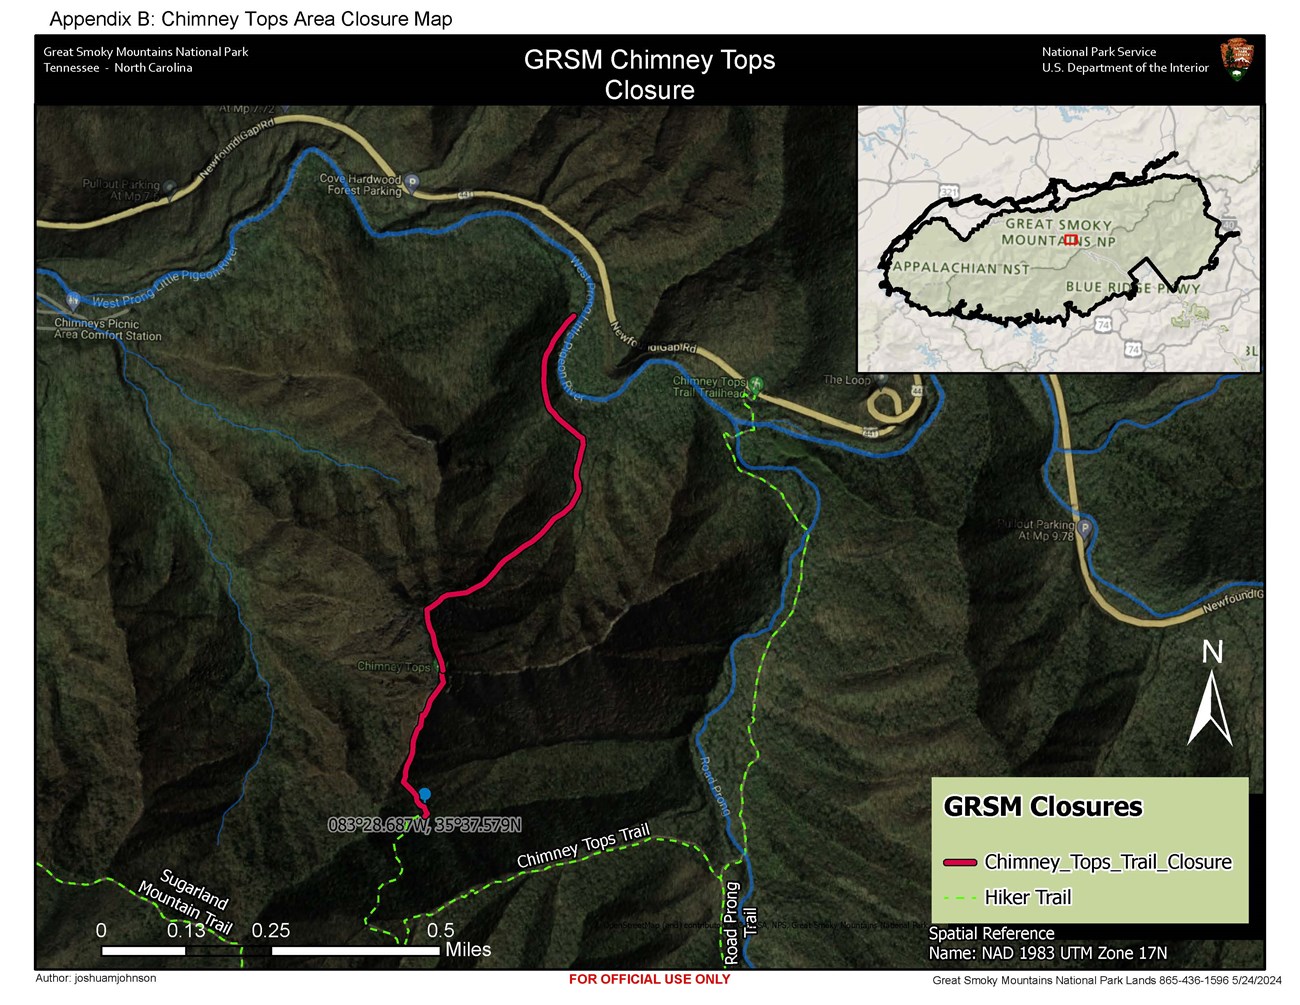 Chimney Tops closure map. Green dashed line from Newfound Gap Road turns to red bold line at lat/long: 083°28.687W, 35°37.579N. Forested topography surrounds marked trails (Sugarland Mtn & Road Prong trails). Inset map in corner. Scale: 0.5 miles.